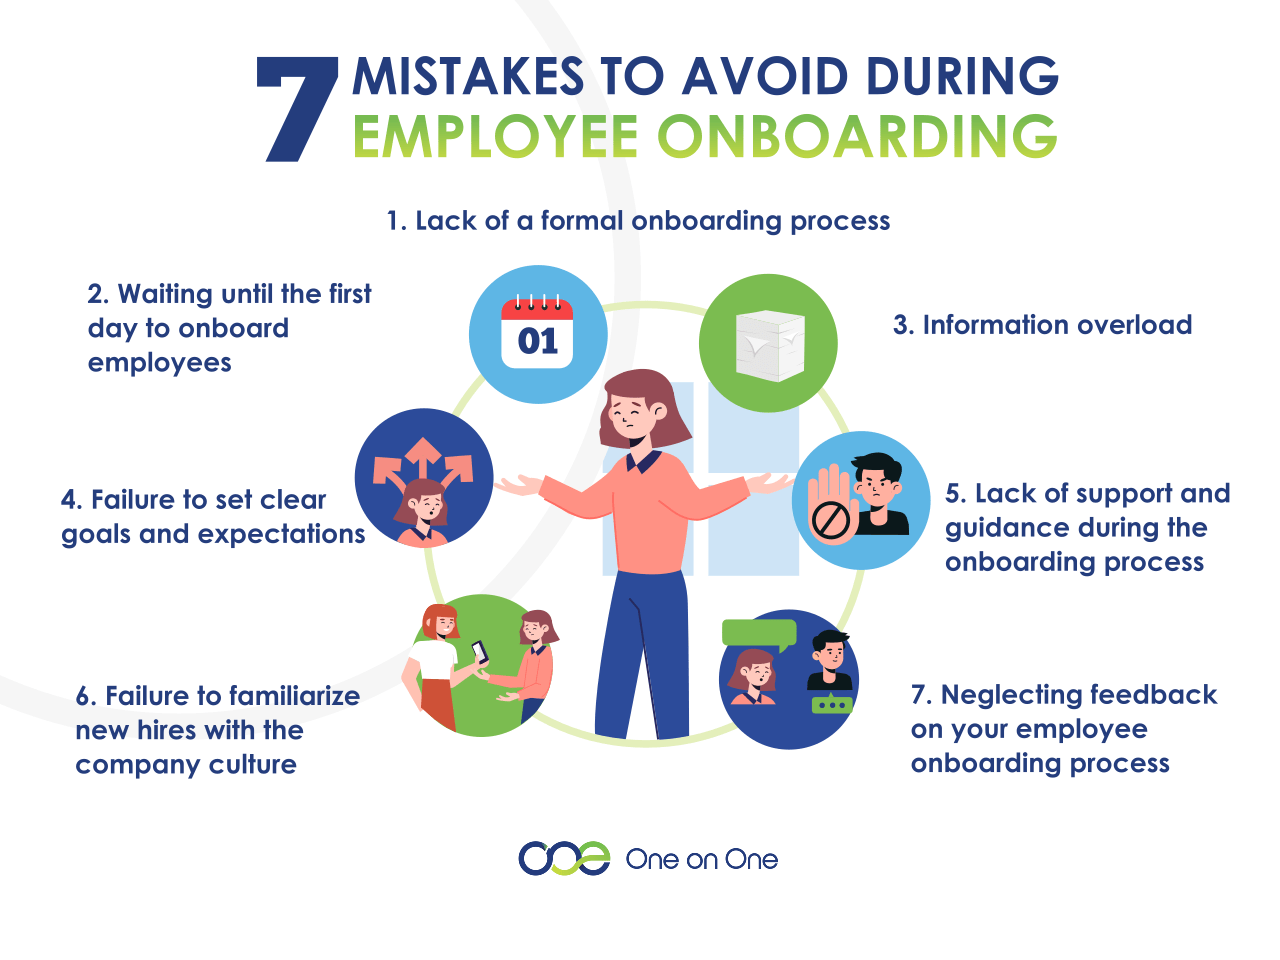 7 Mistakes To Avoid During Employee Onboarding